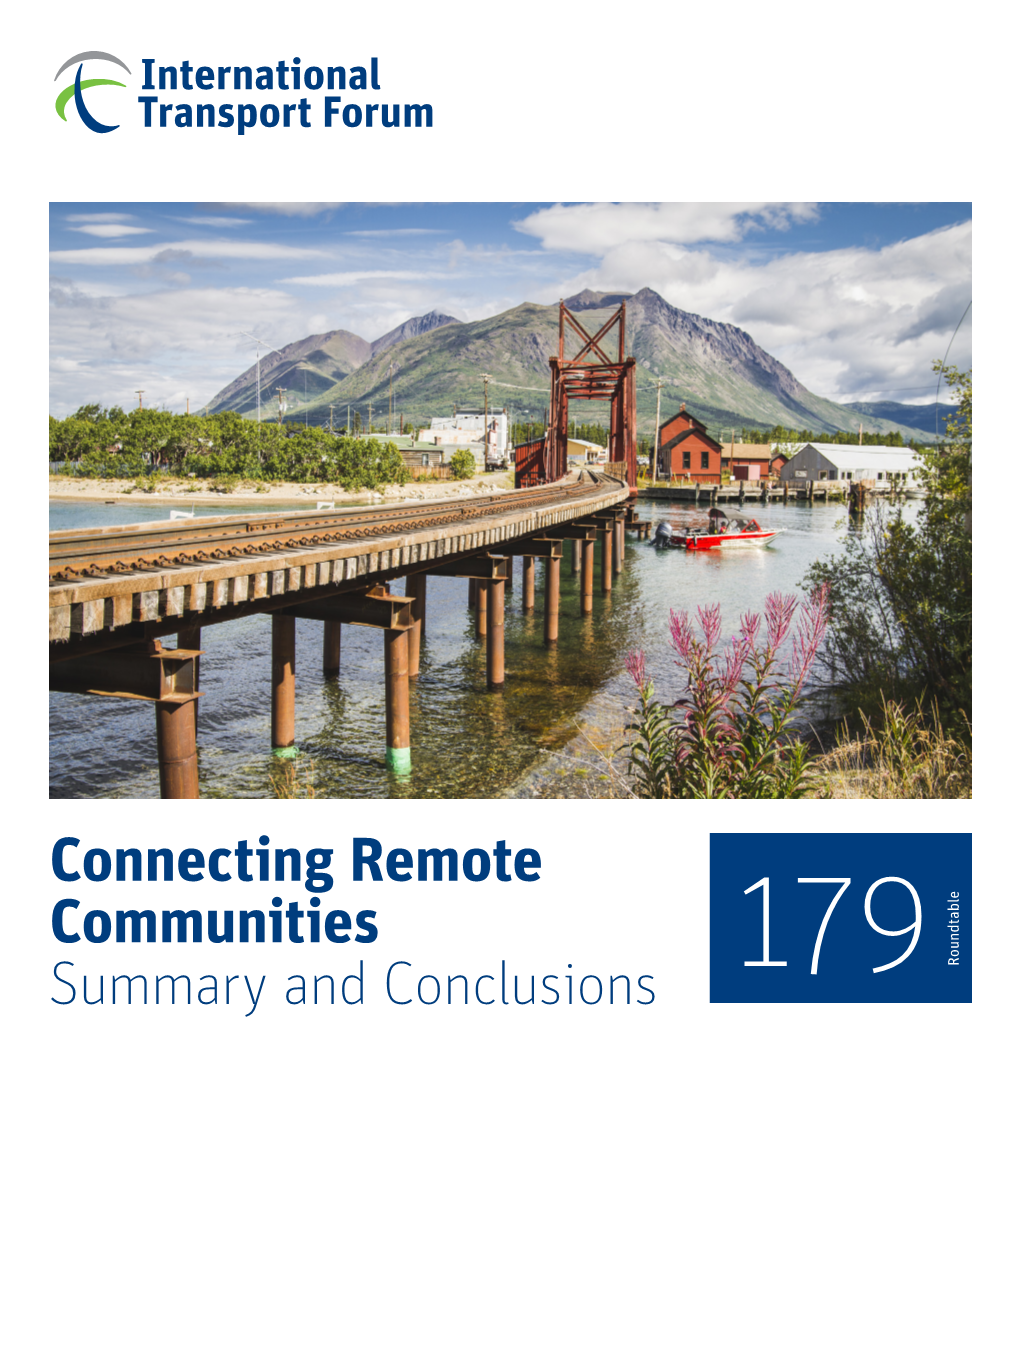 Connecting Remote Communities Summary and Conclusions 179 Roundtable Summary and Conclusions and Summary Communities Remote Connecting